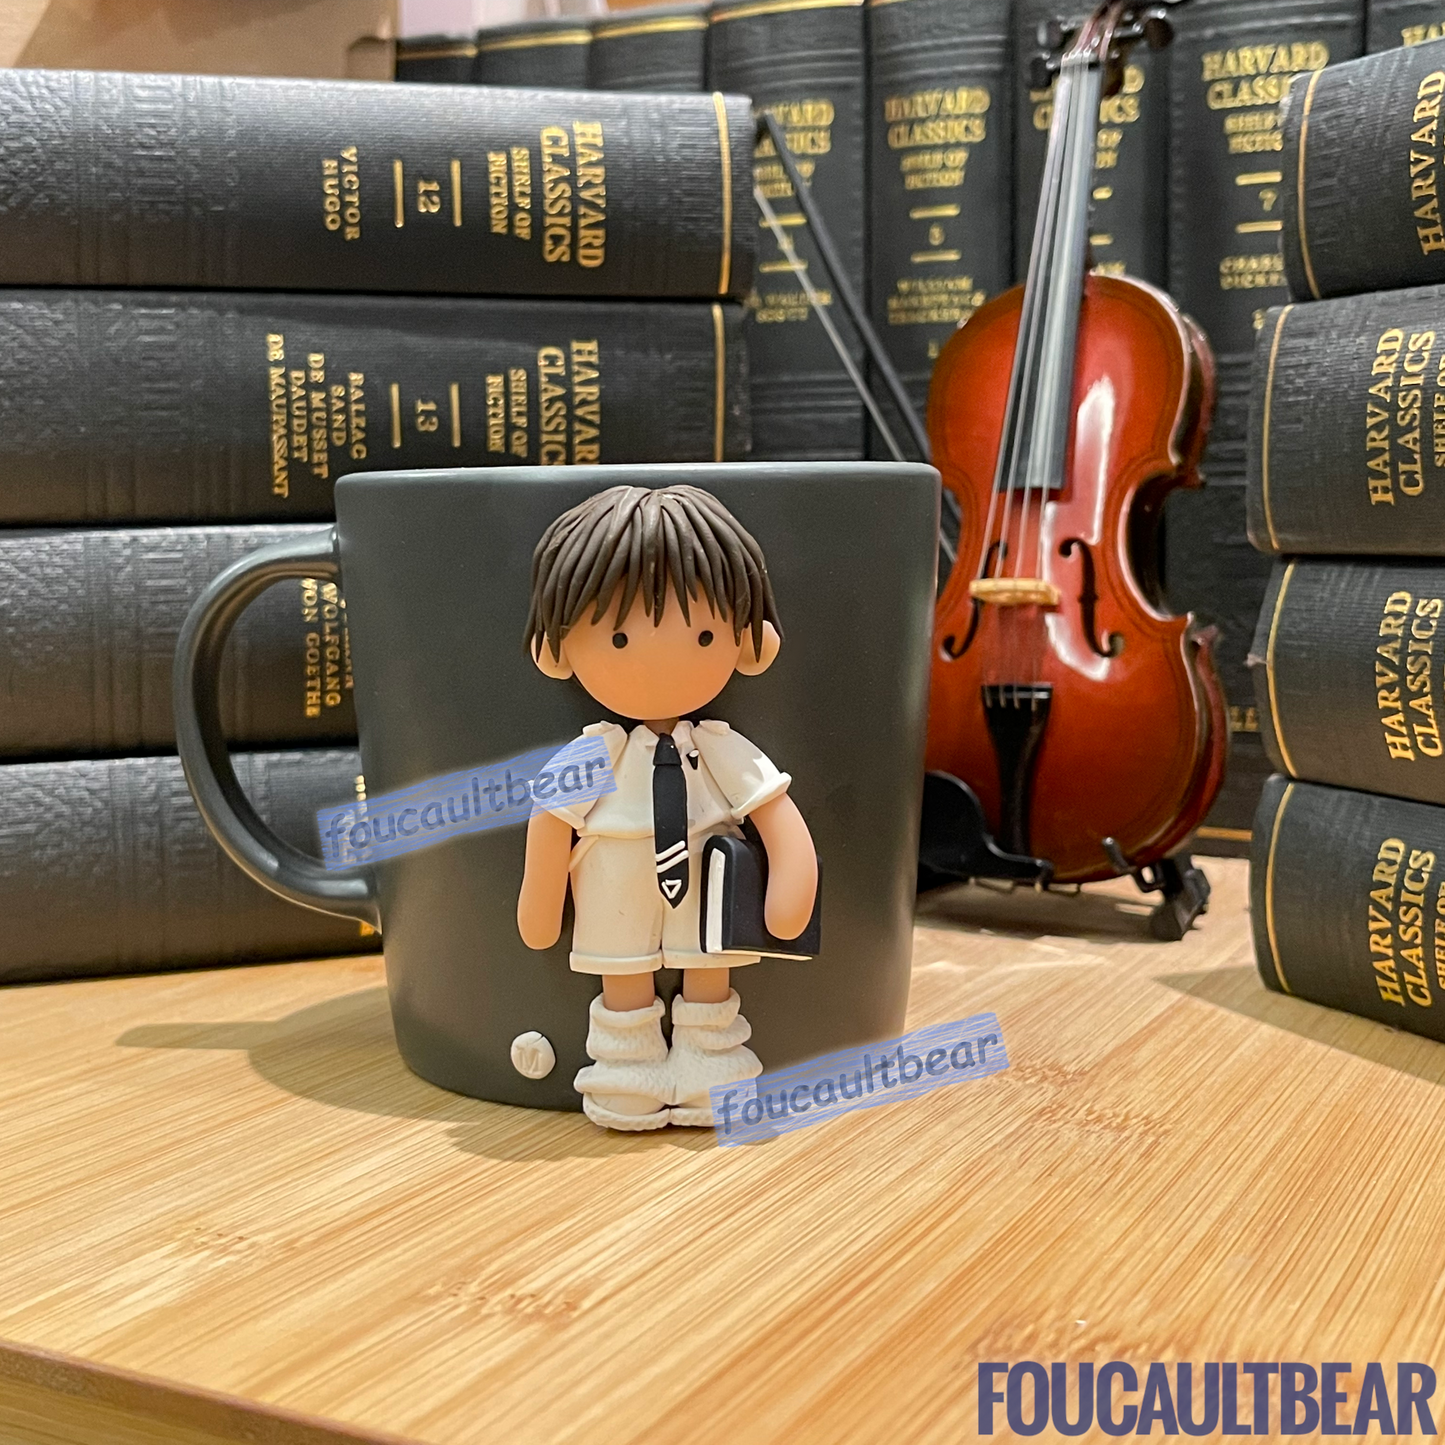 I'm very excited to debut my handcrafted "School Series" polymer clay figurine on mugs. Introducing for the first time, Caden, of the Chloe and Caden series. Every Chloe and Caden figurine is handcrafted with lots of thought and care. They make great storage for pens, pencils, small rulers, etc....